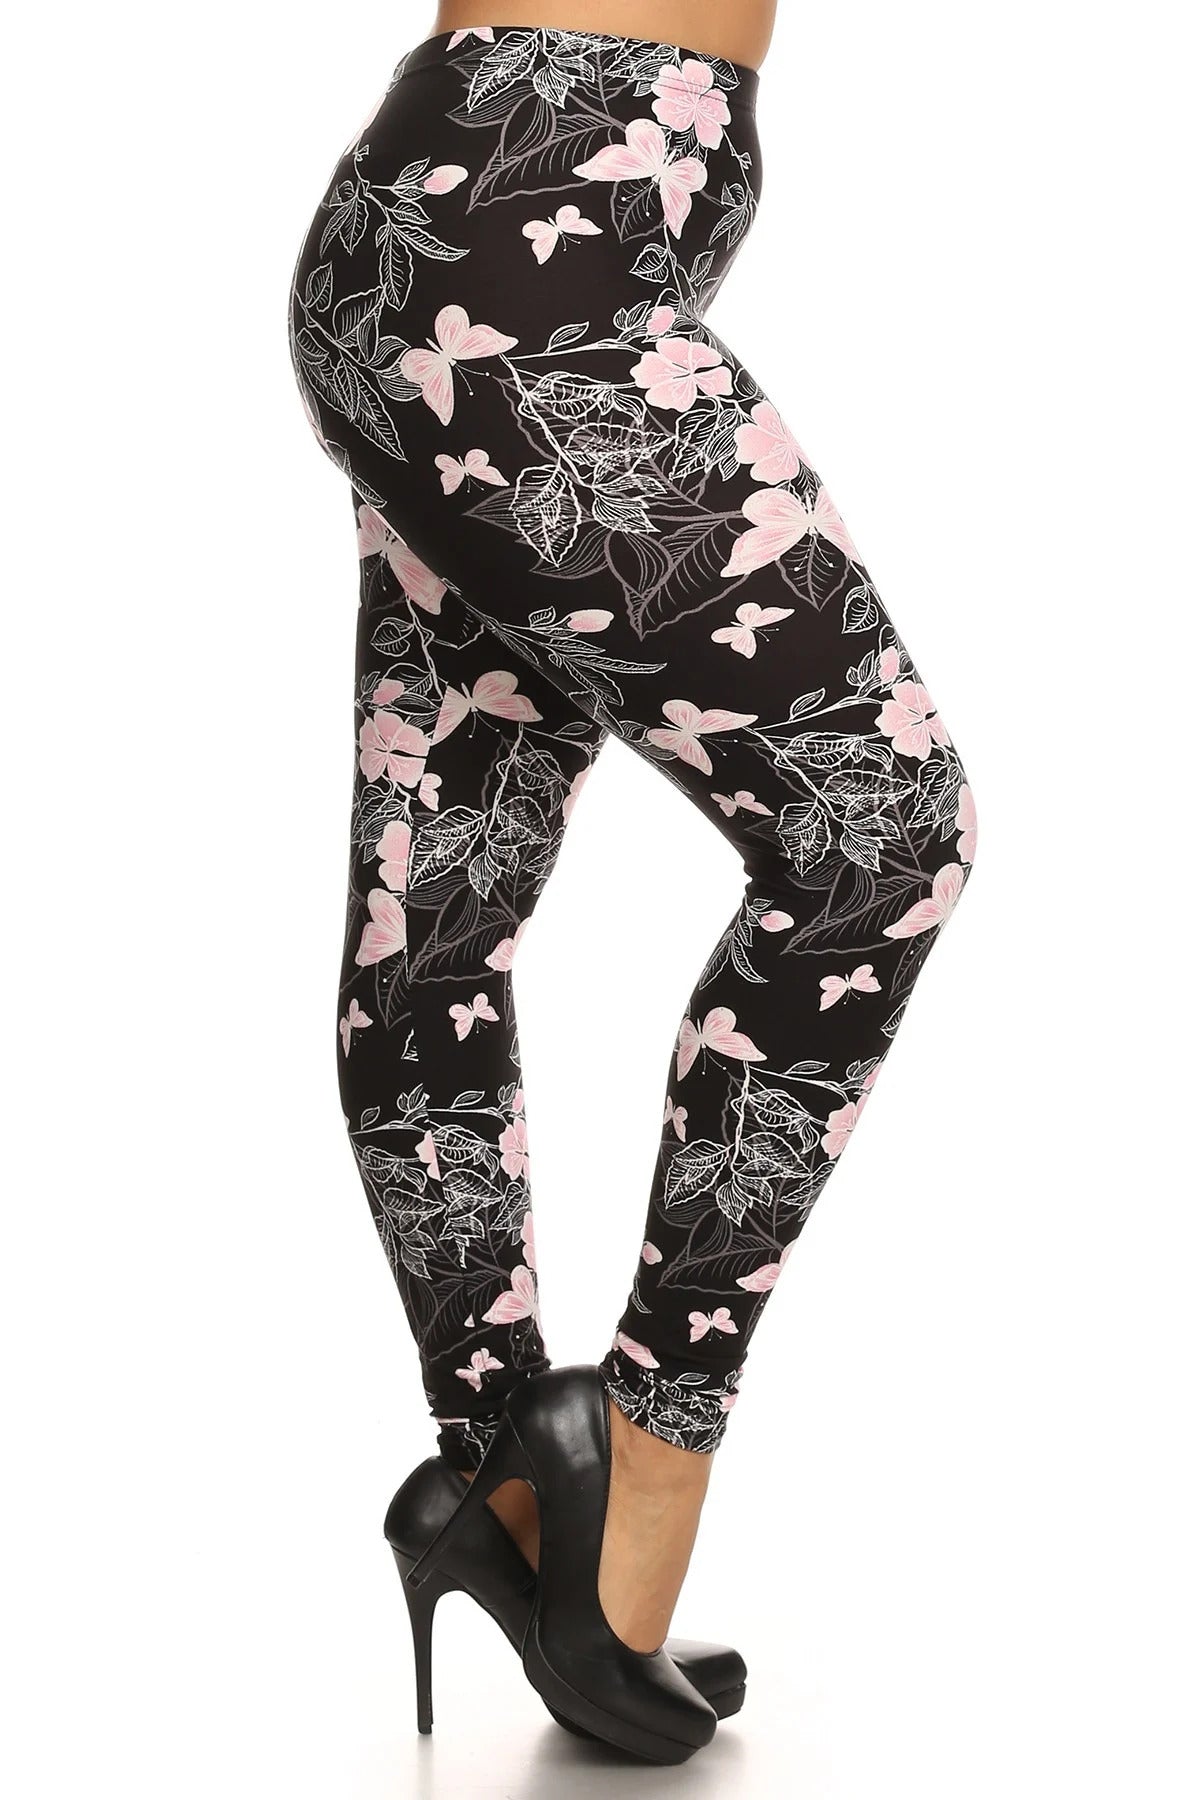 Soft Peach Skin Fabric Butterfly Graphic Printed Knit Legging